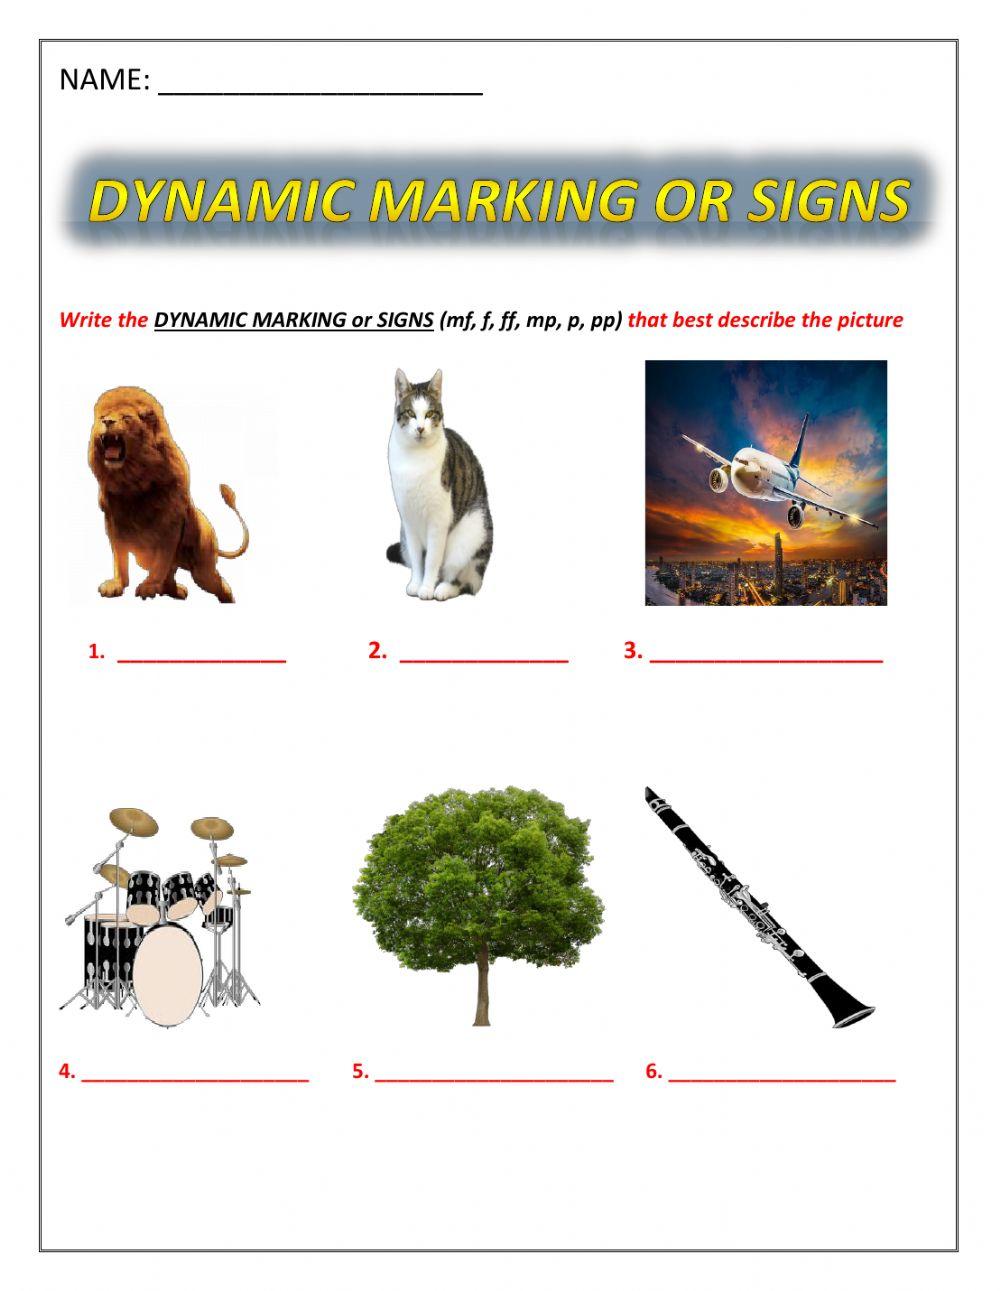 Dynamic Marking or Signs